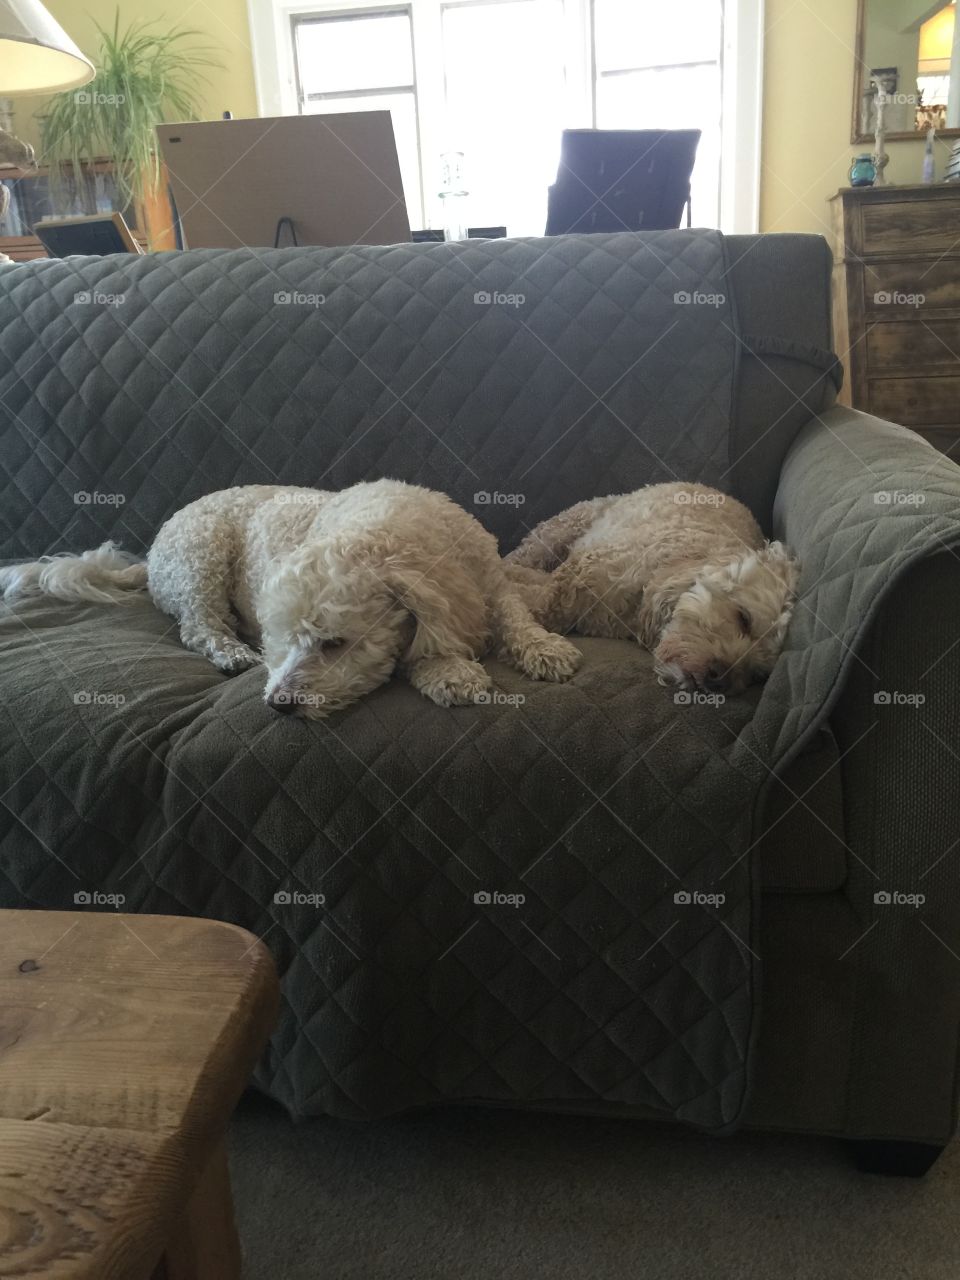 Cockapoo puppies nap on the couch